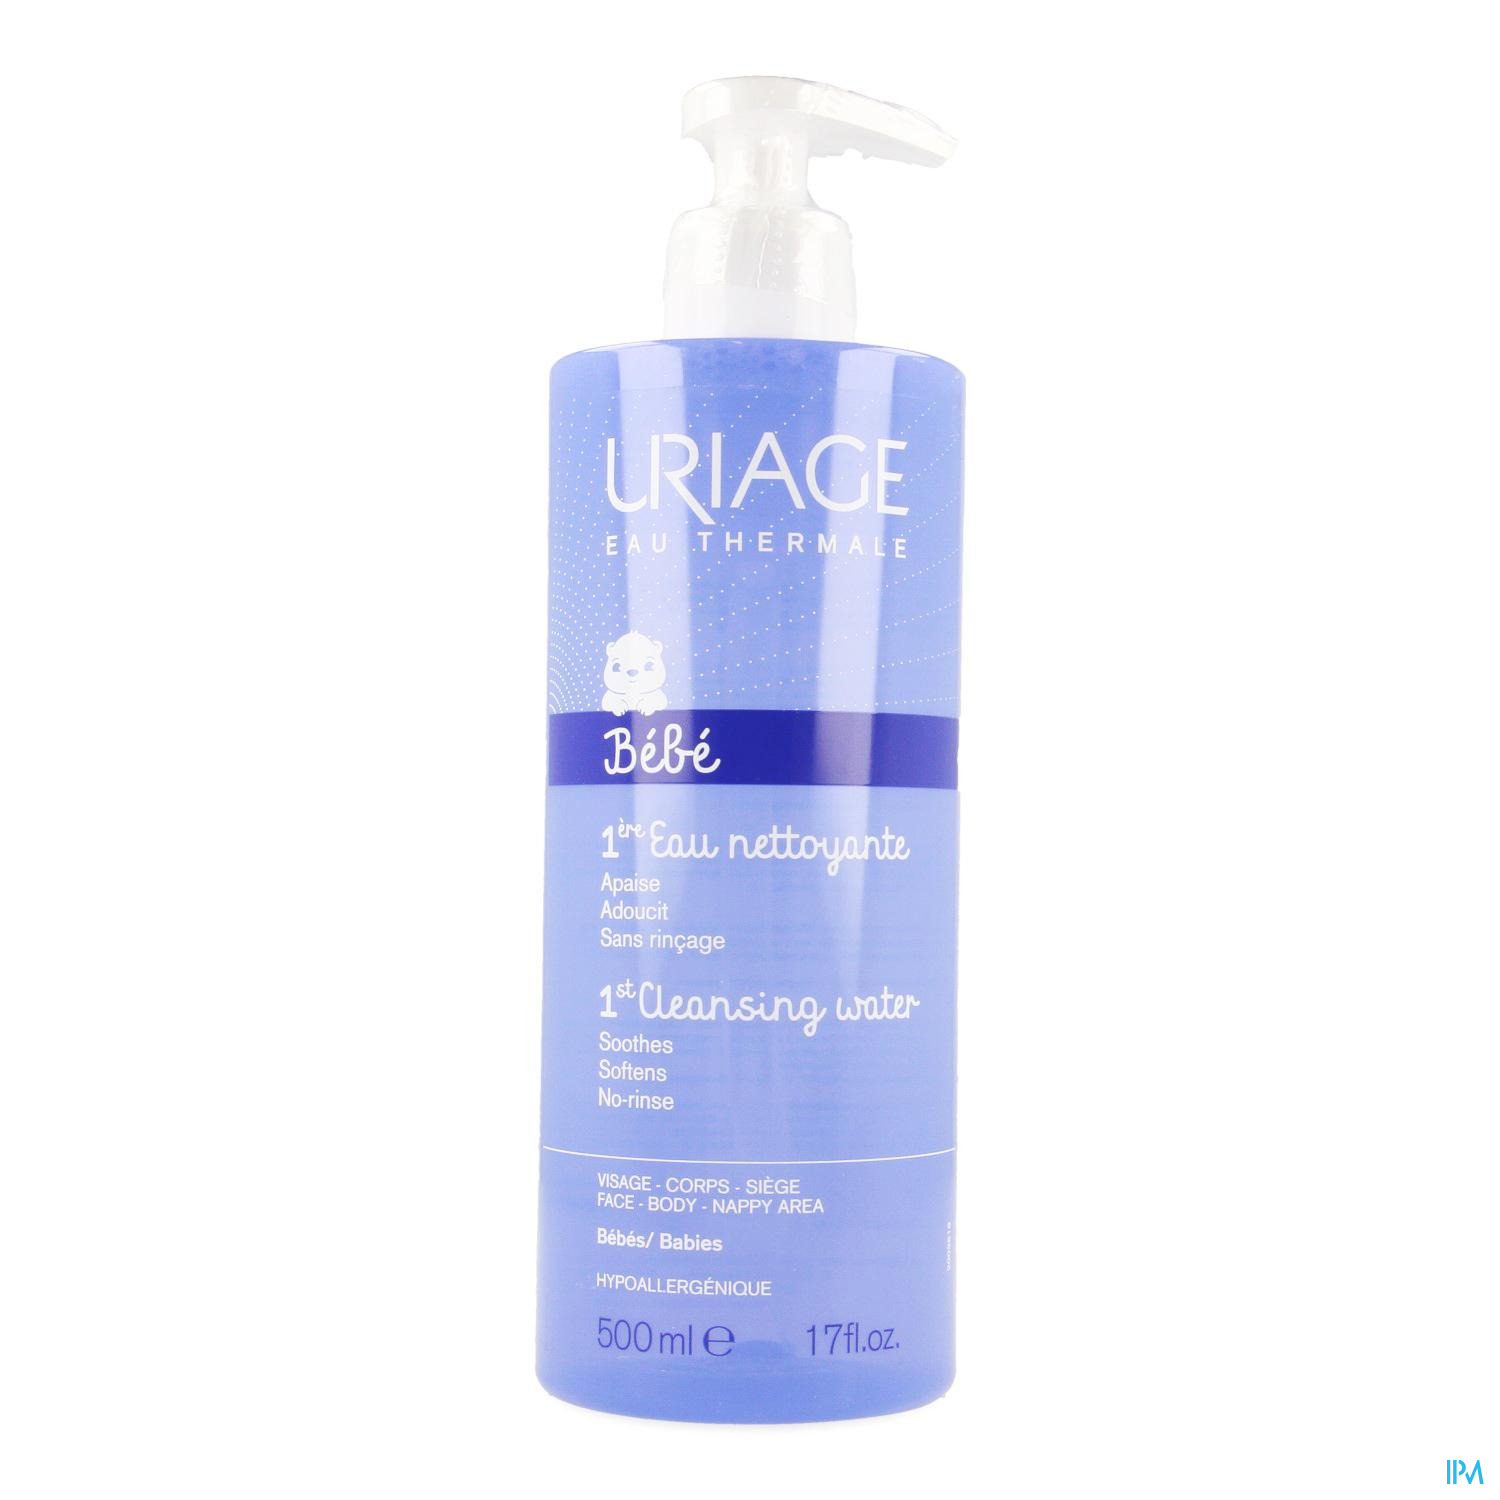 Uriage Thermale 1ere Eau 500ml